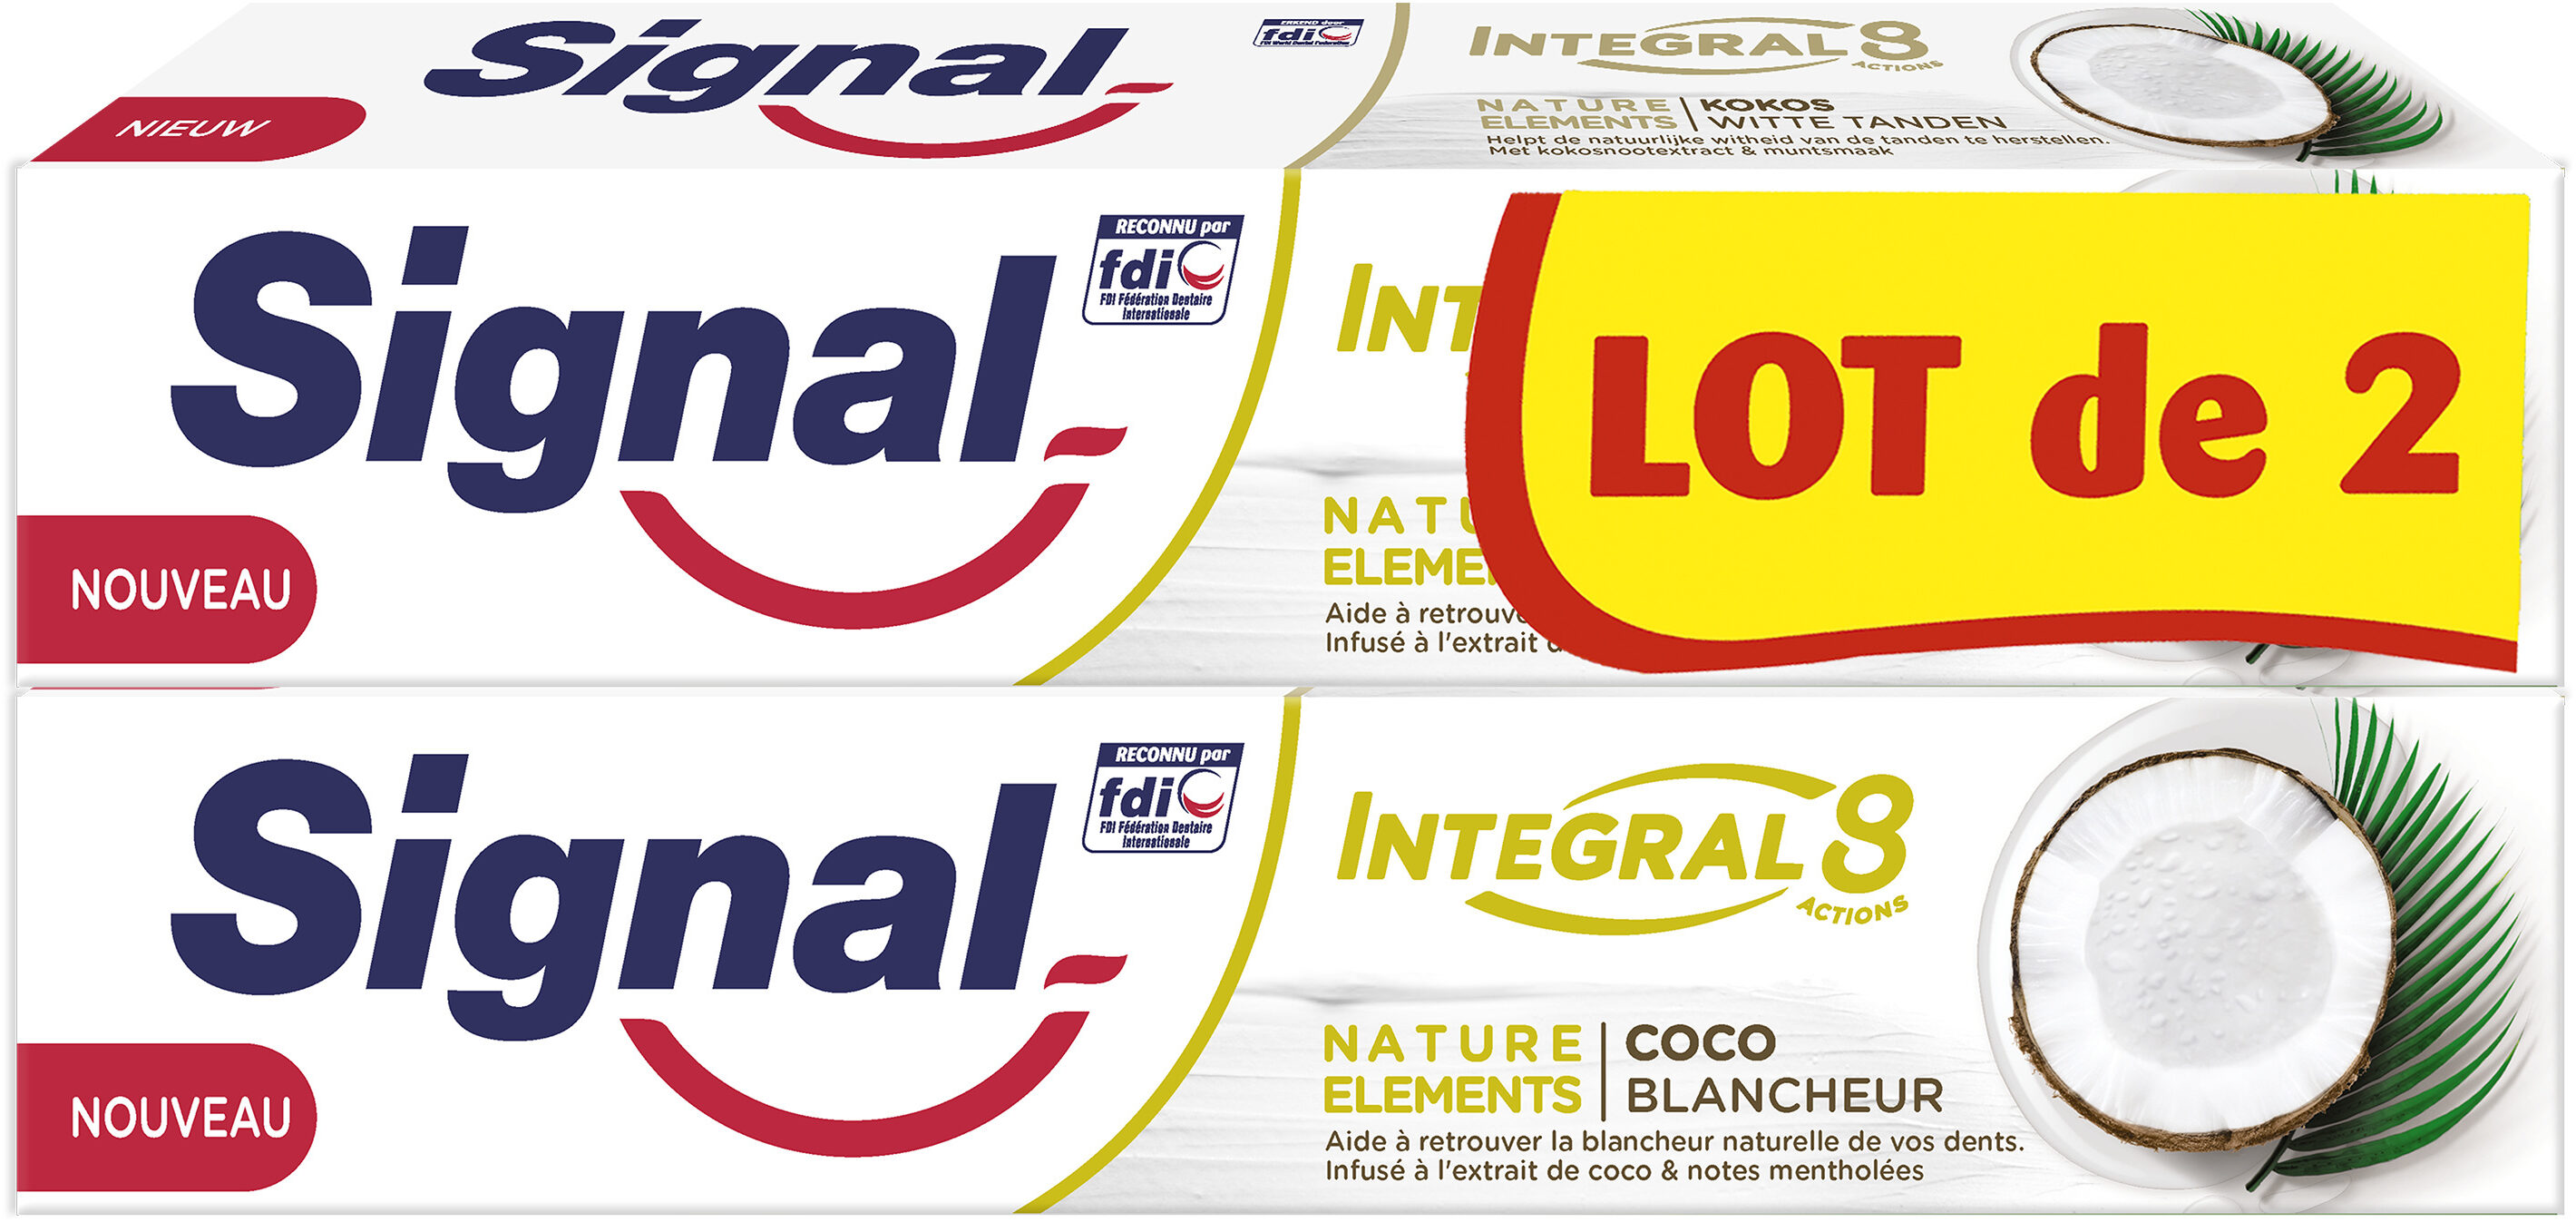 Signal Integral 8 Dentifrice Nature Elements Coco Blancheur 2x75ml - Product - fr